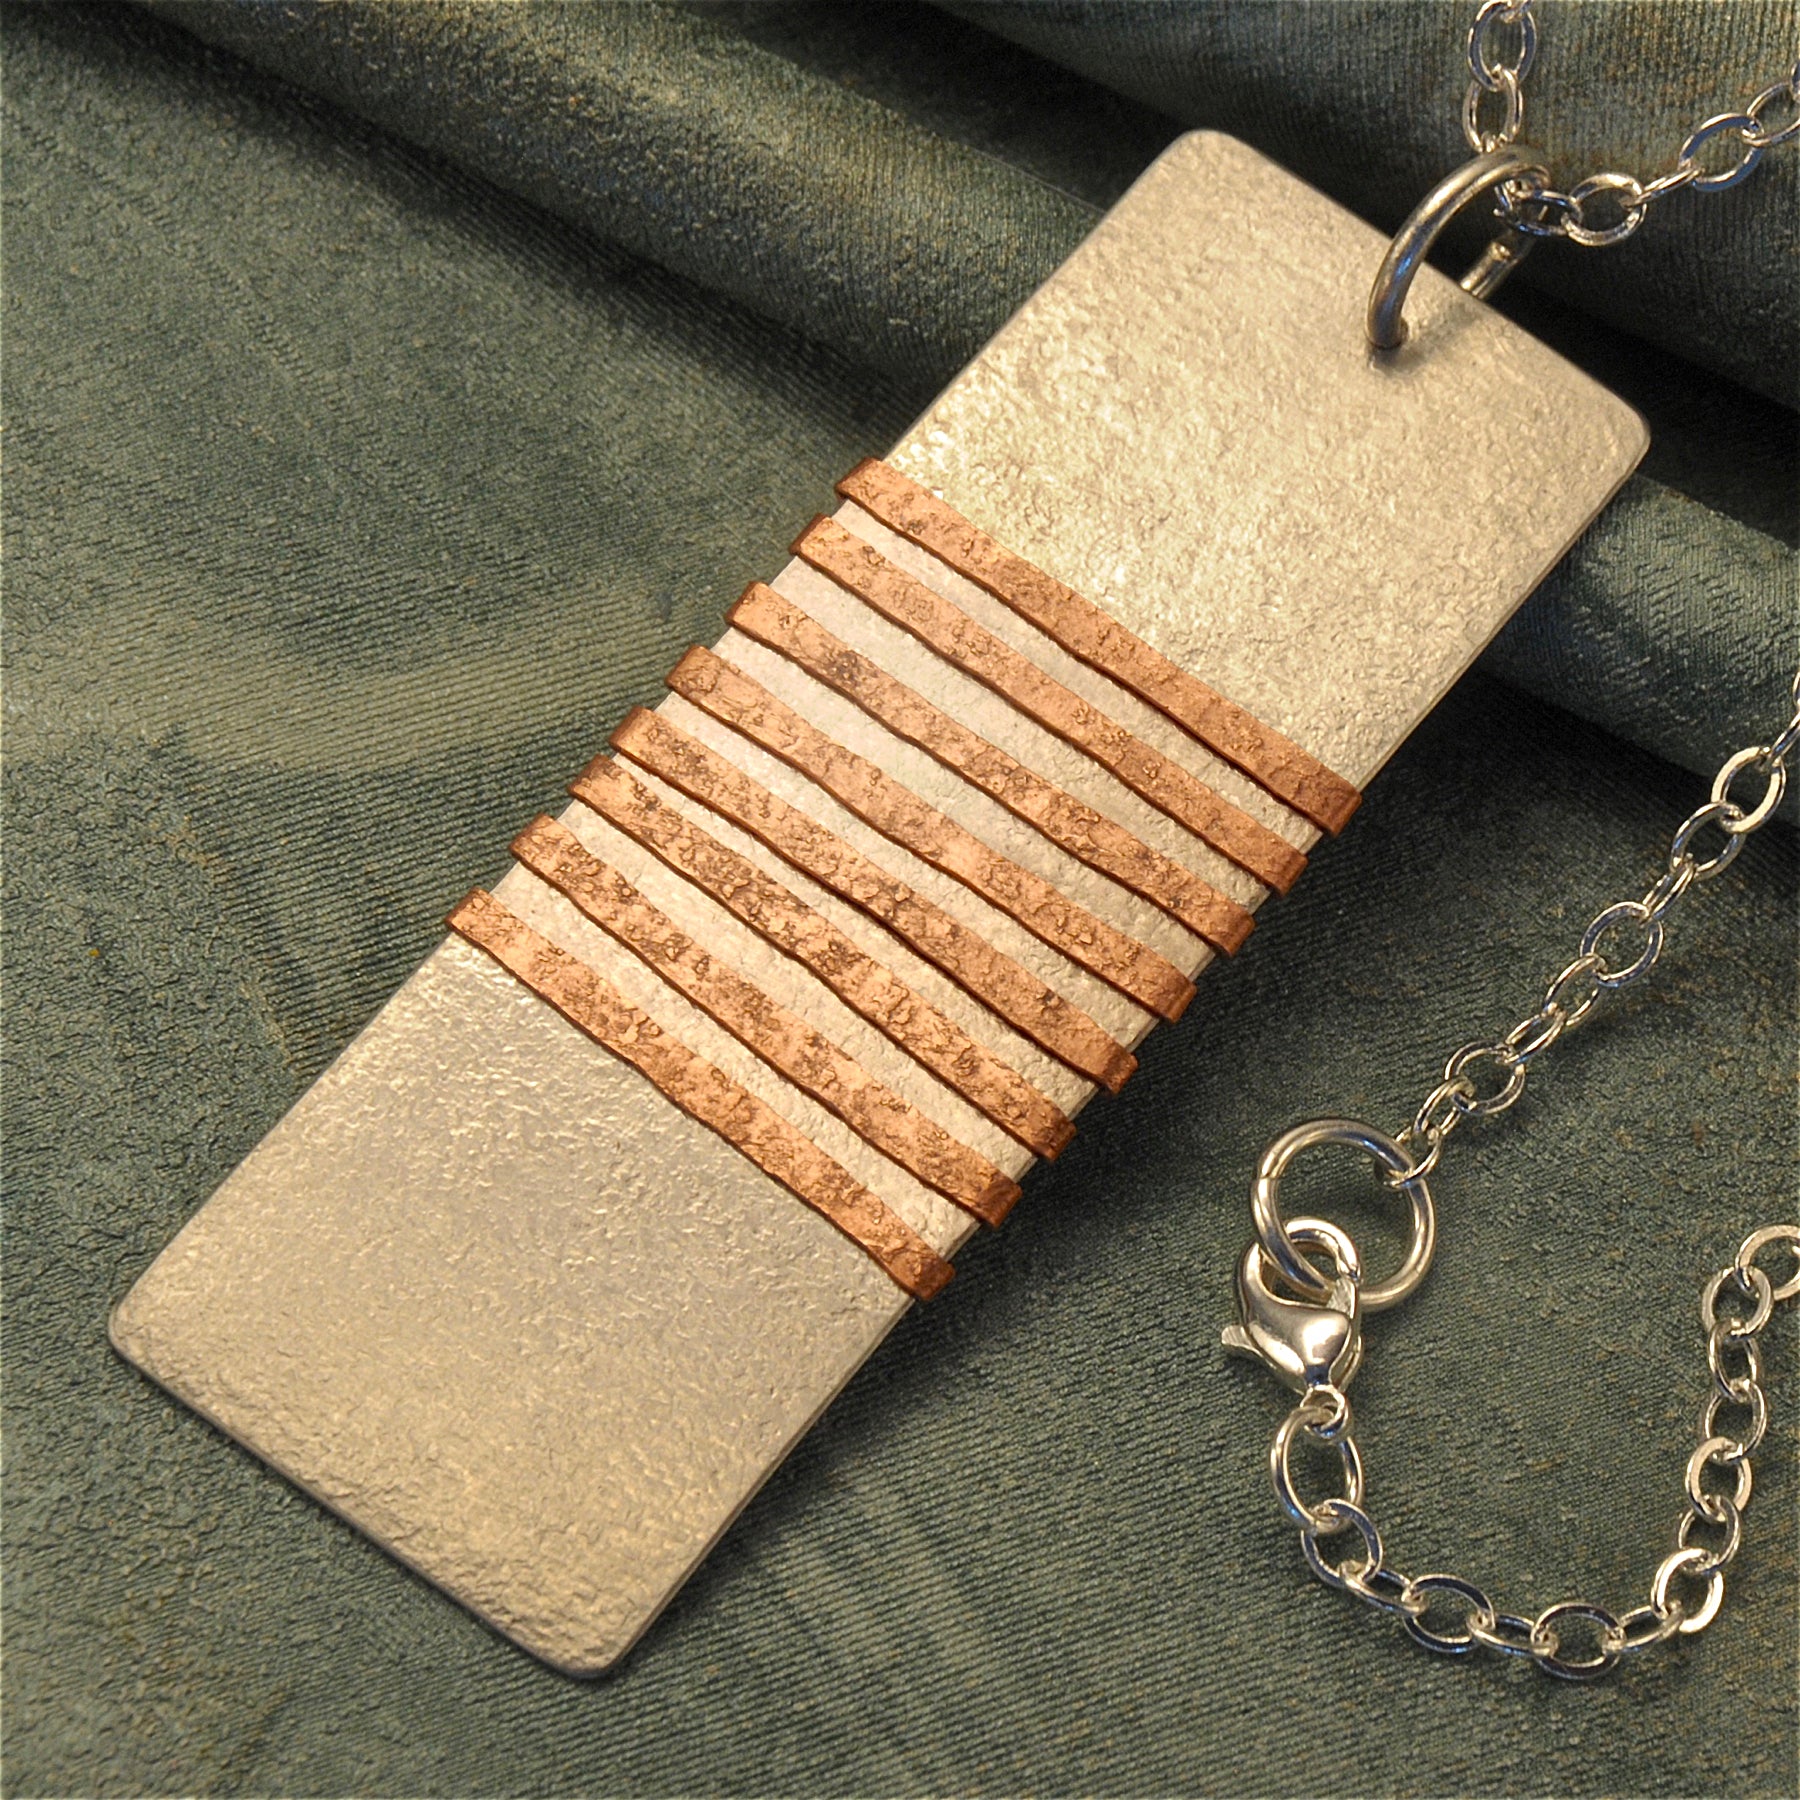 Rectangular stainless steel necklace